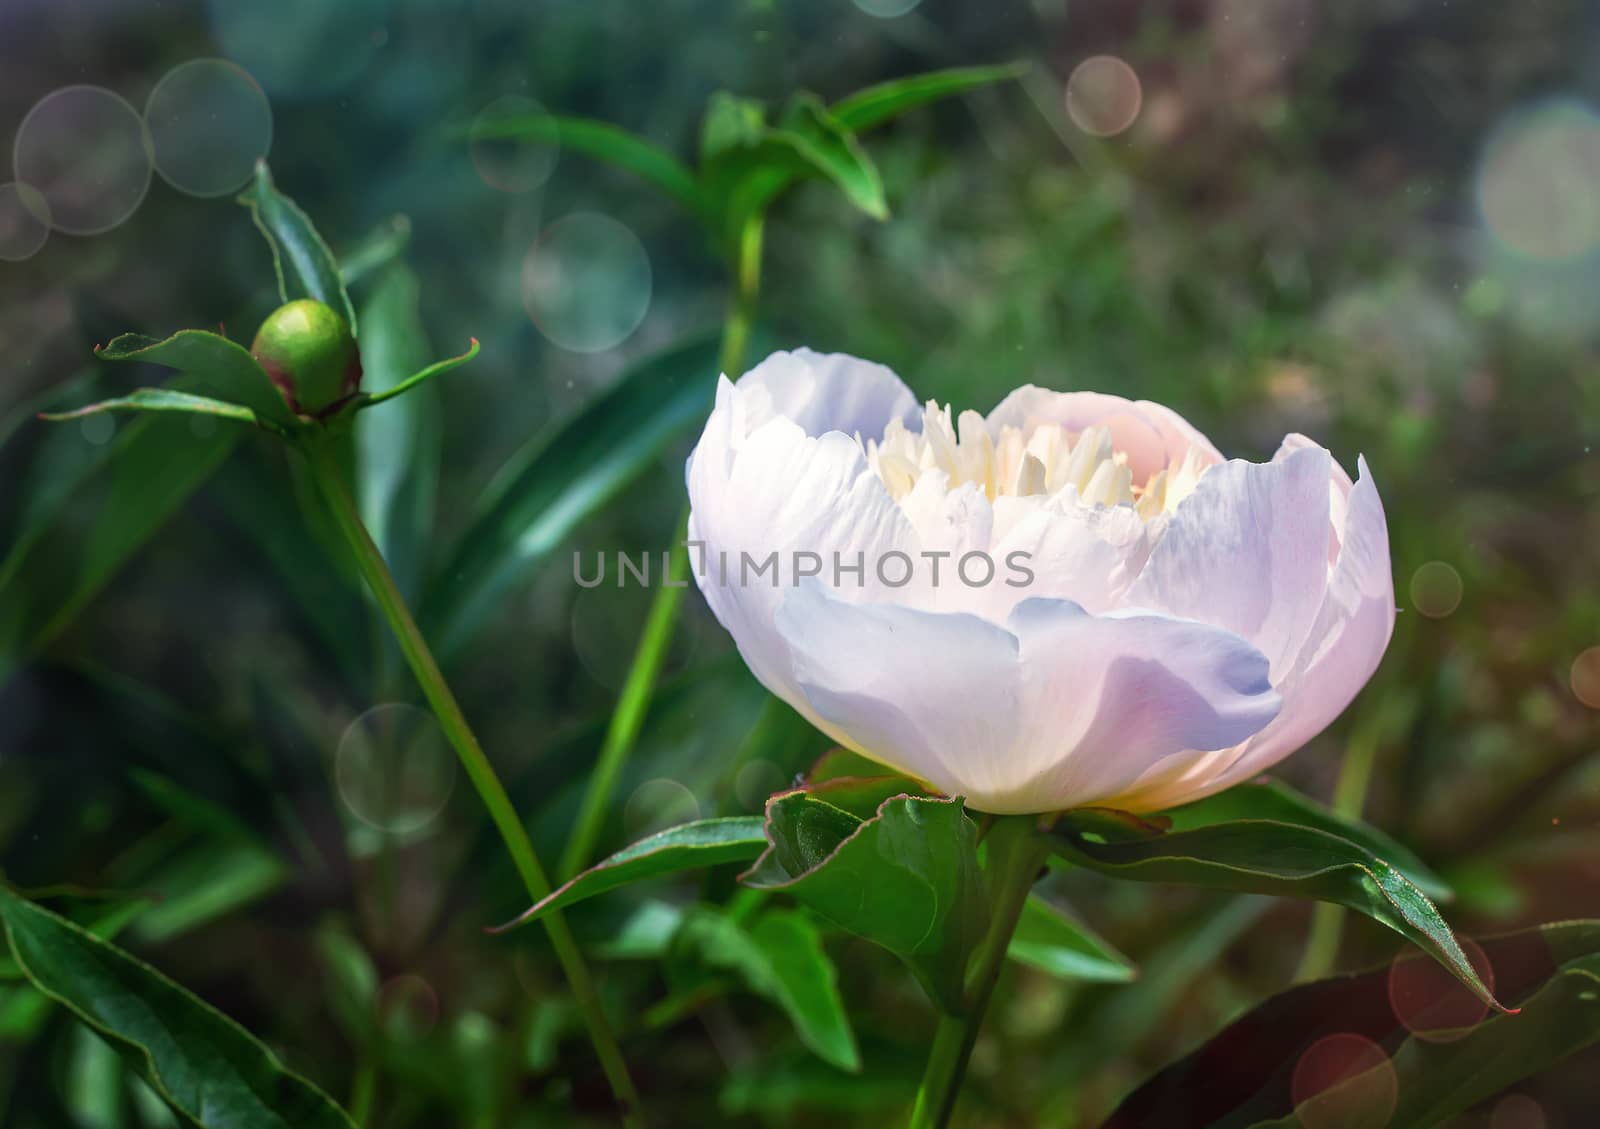 The beautiful large white peony blossoming in a garden among the green leaves, is photographed by a close up.